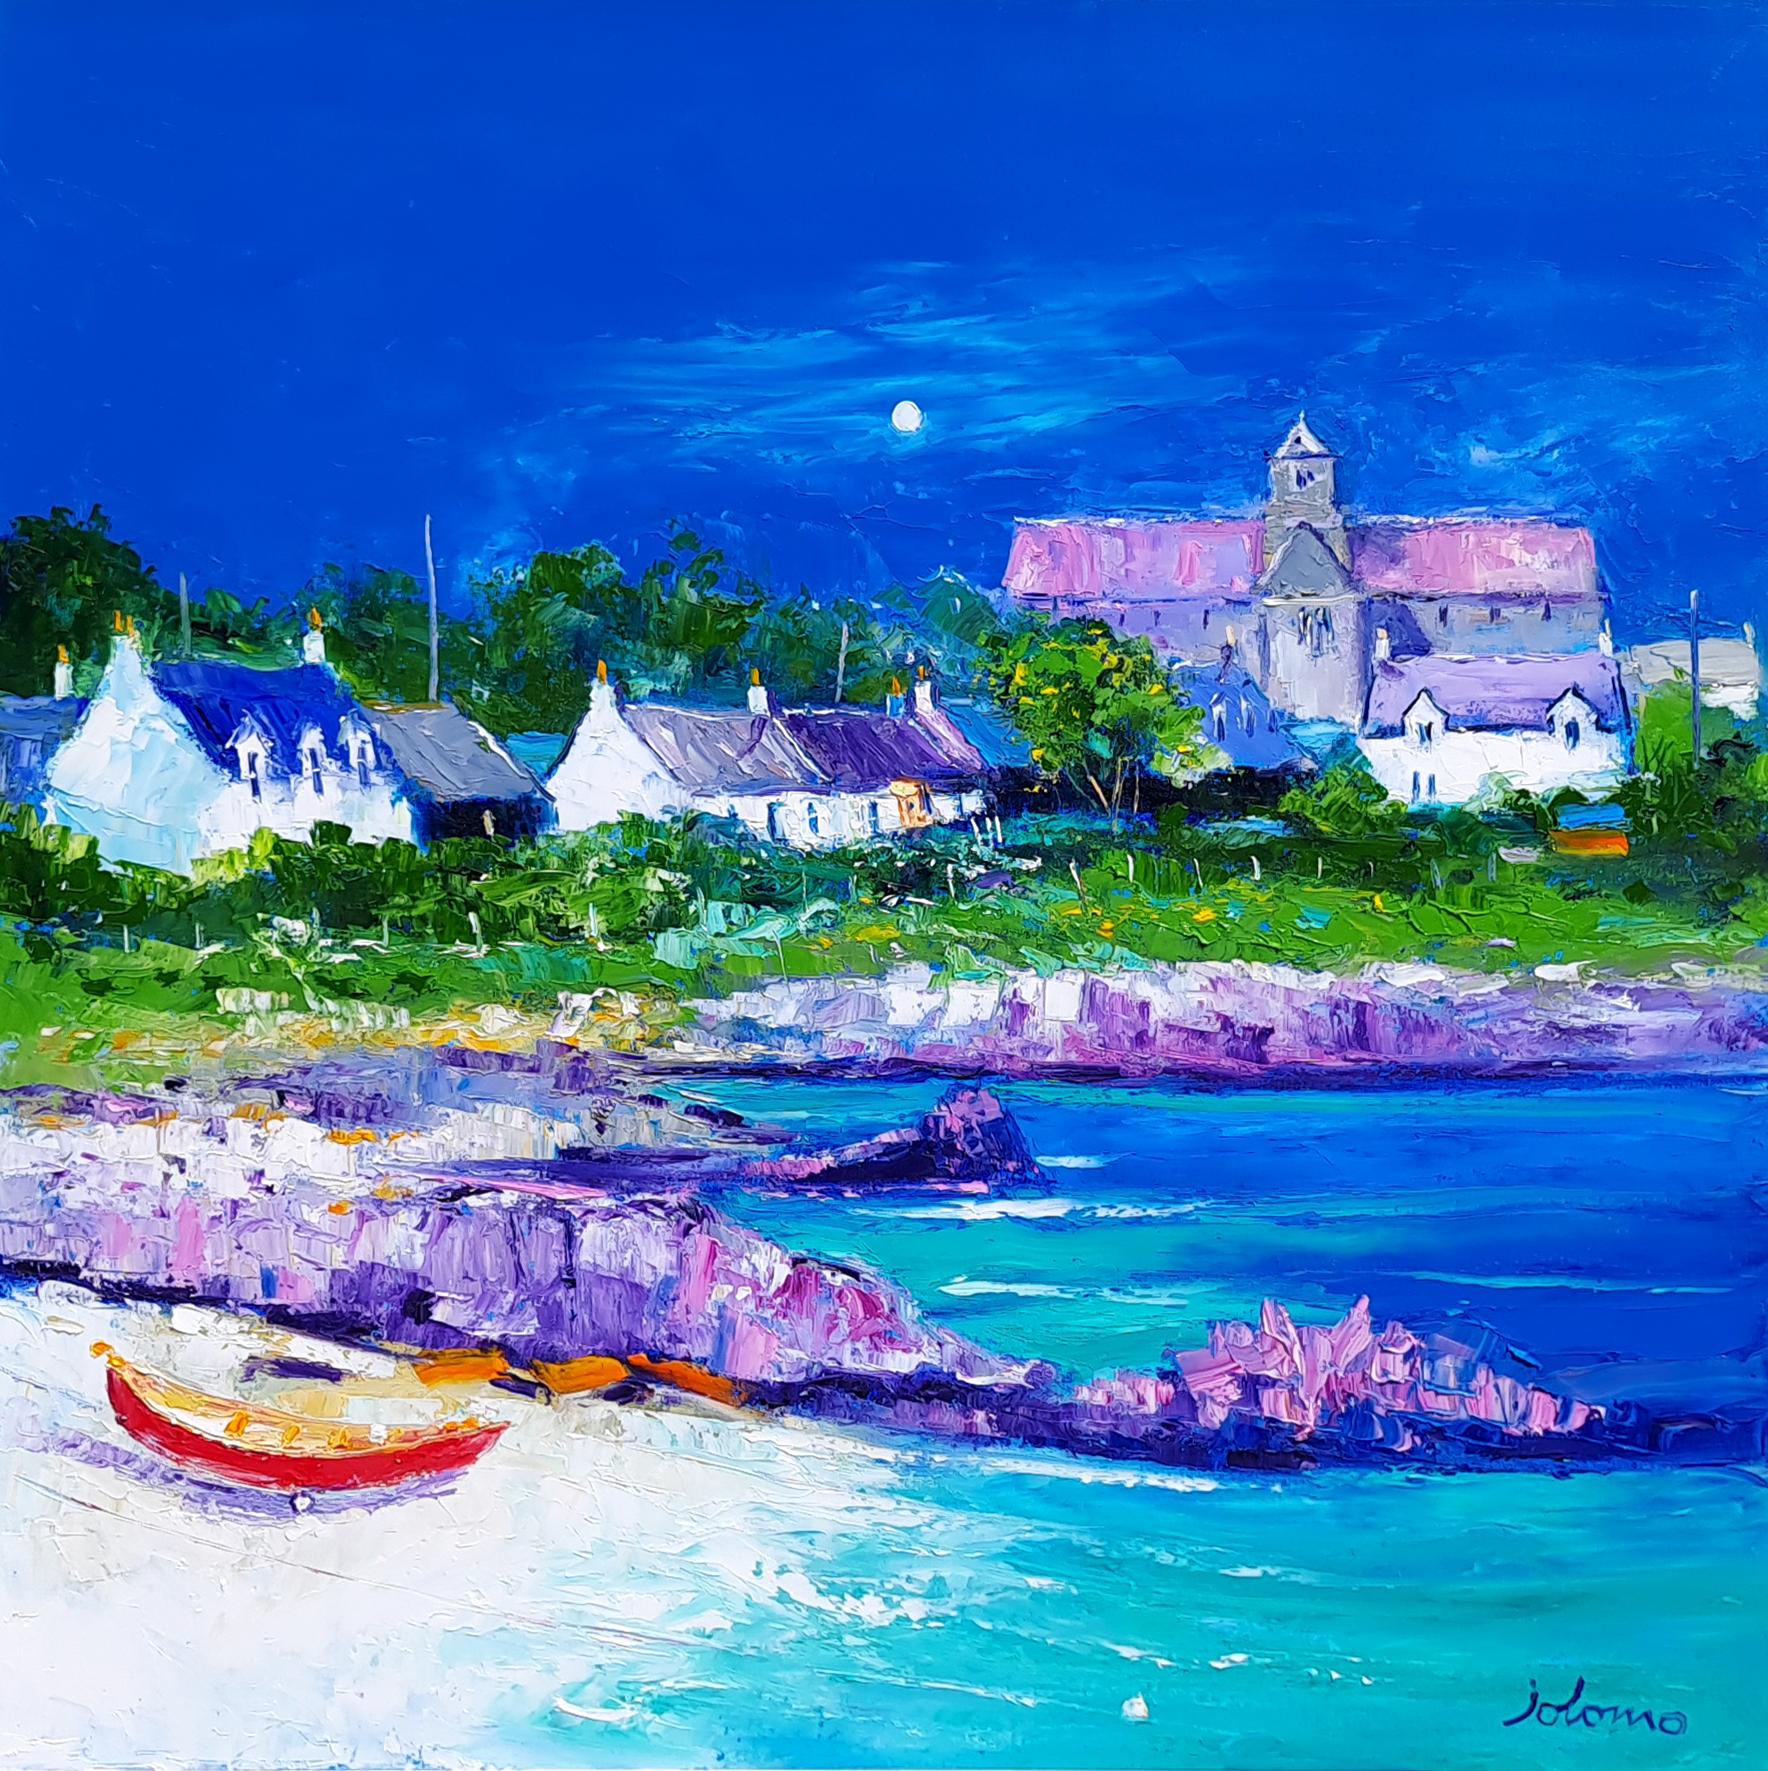 Summer Evening Light, The Abbey, Isle of Iona - Painting by JOLOMO - John Lowrie Morrison OBE